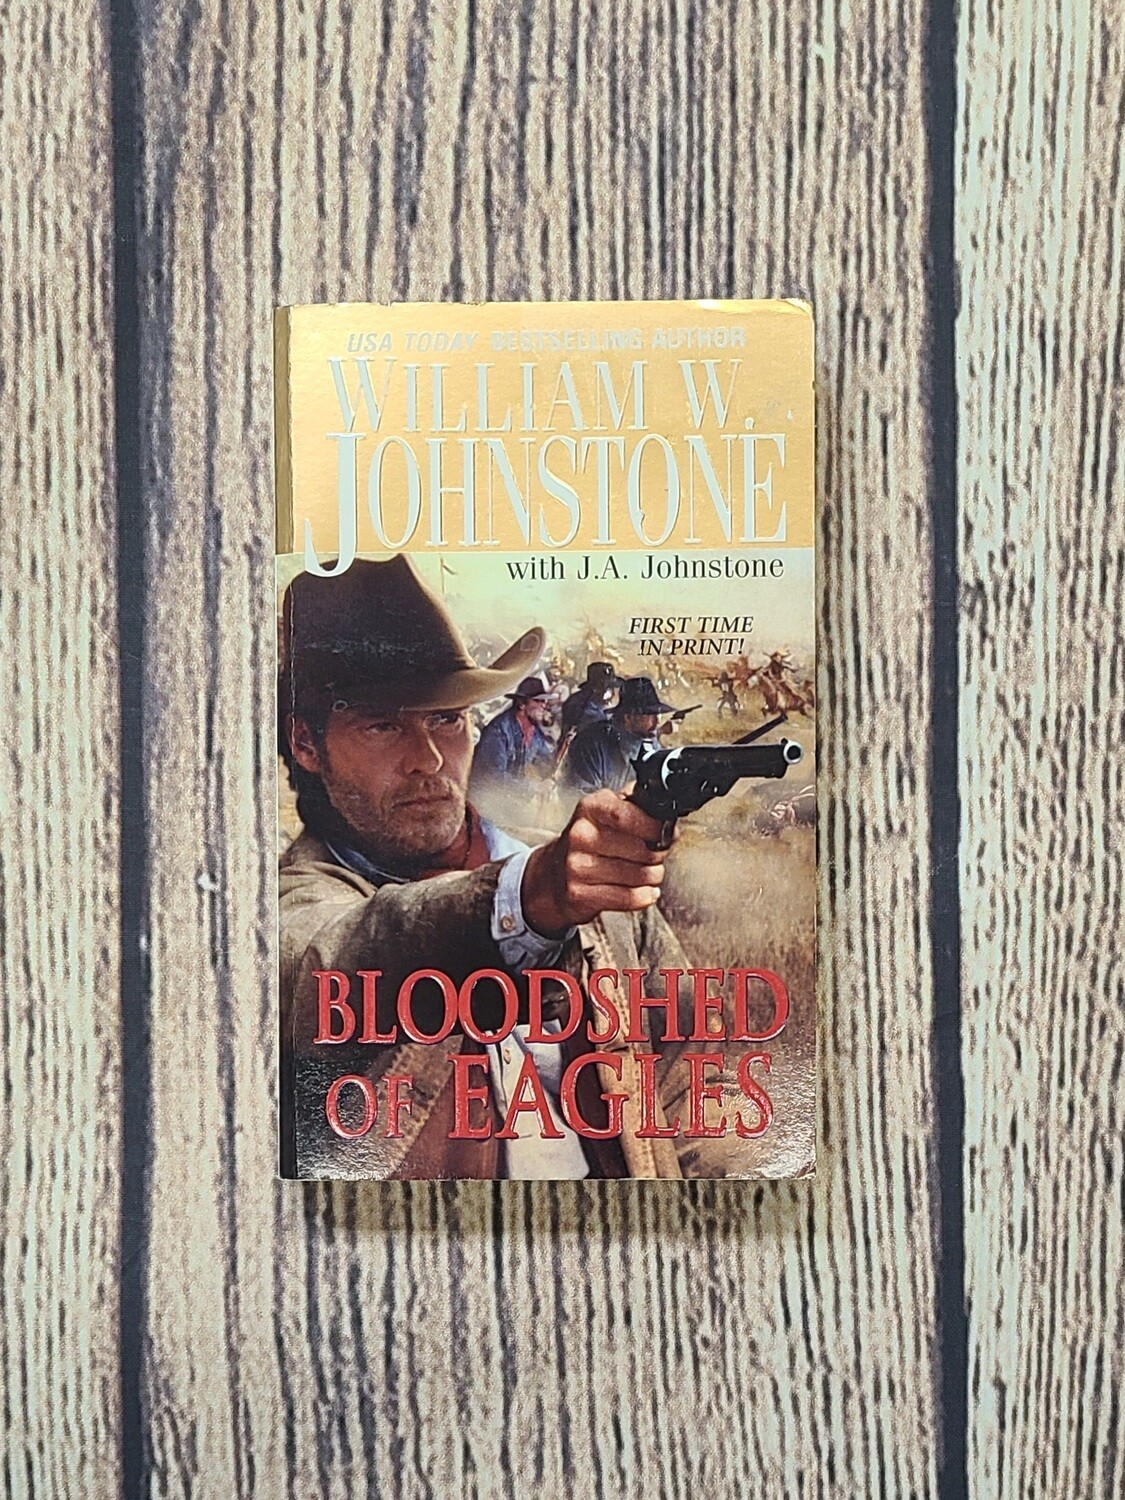 Bloodshed of Eagles by William W. Johnstone with J.A. Johnstone